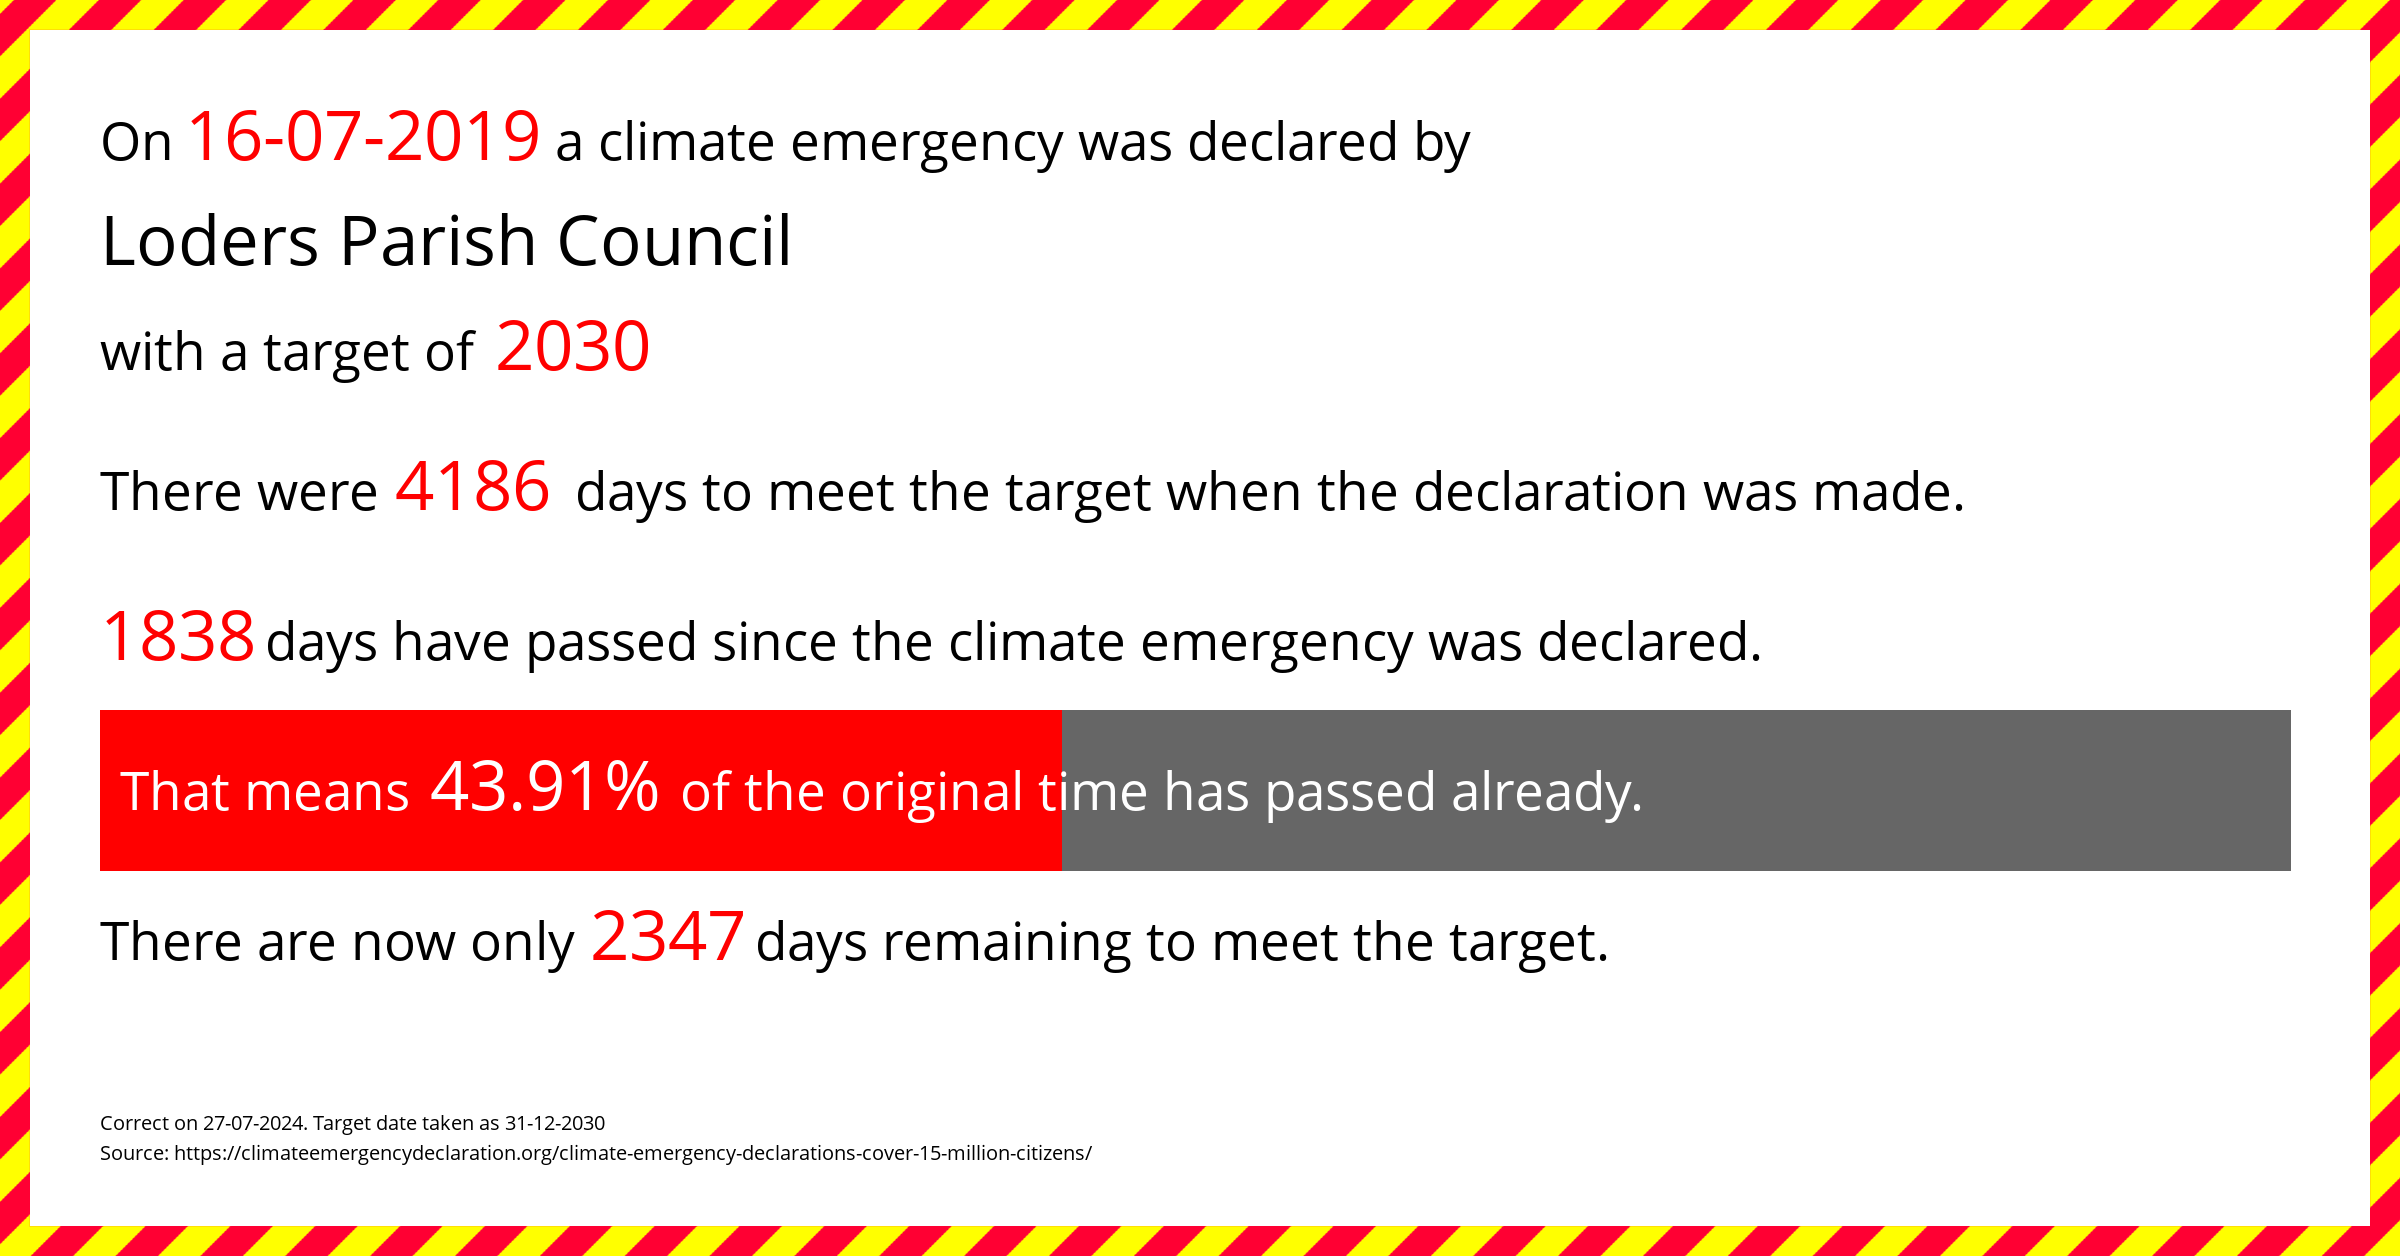 Loders Parish Council  declared a Climate emergency on Tuesday 16th July 2019, with a target of 2030.